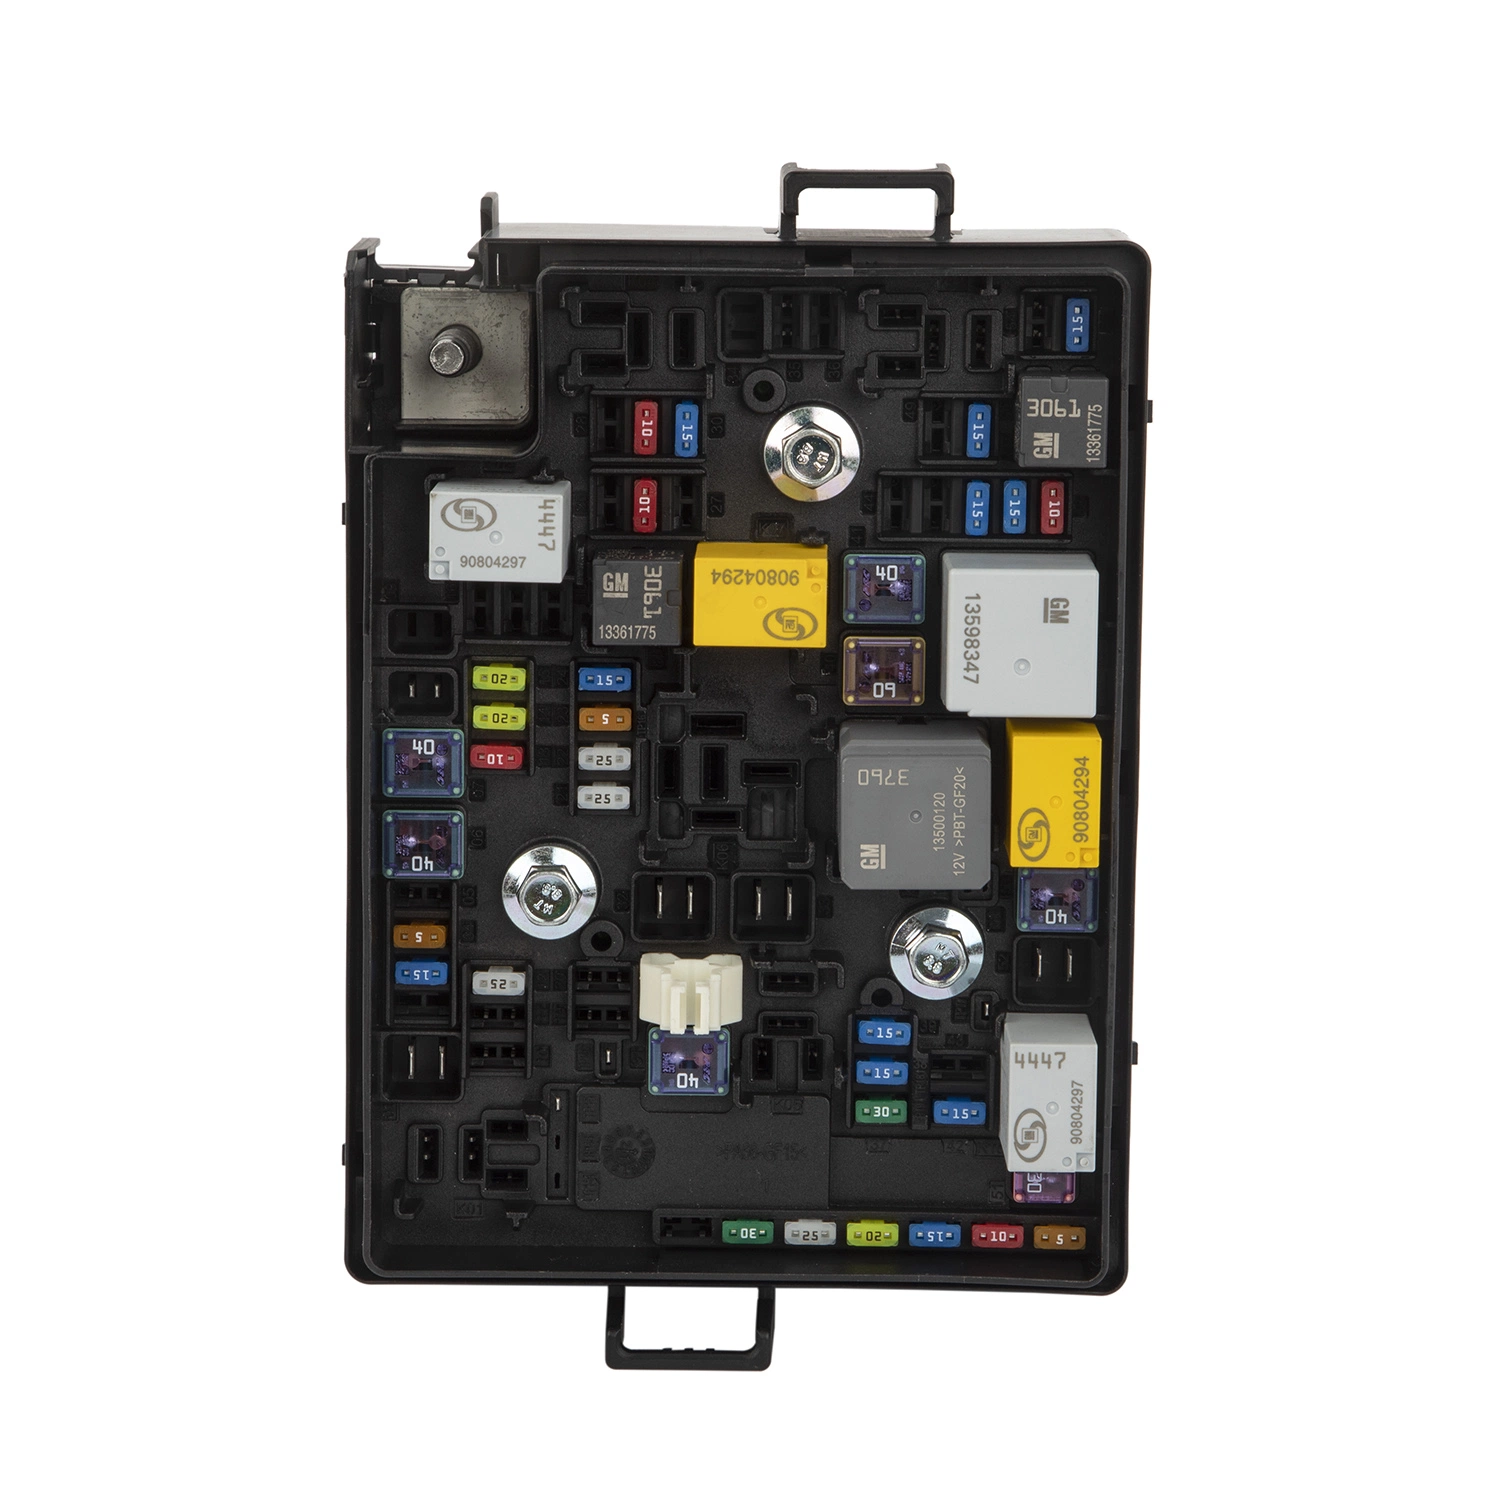 Underhood Electrical Centre Vehicle Power Fusing Protection Injection Molded Parts Terminal-Blocks Auto Fuse Box